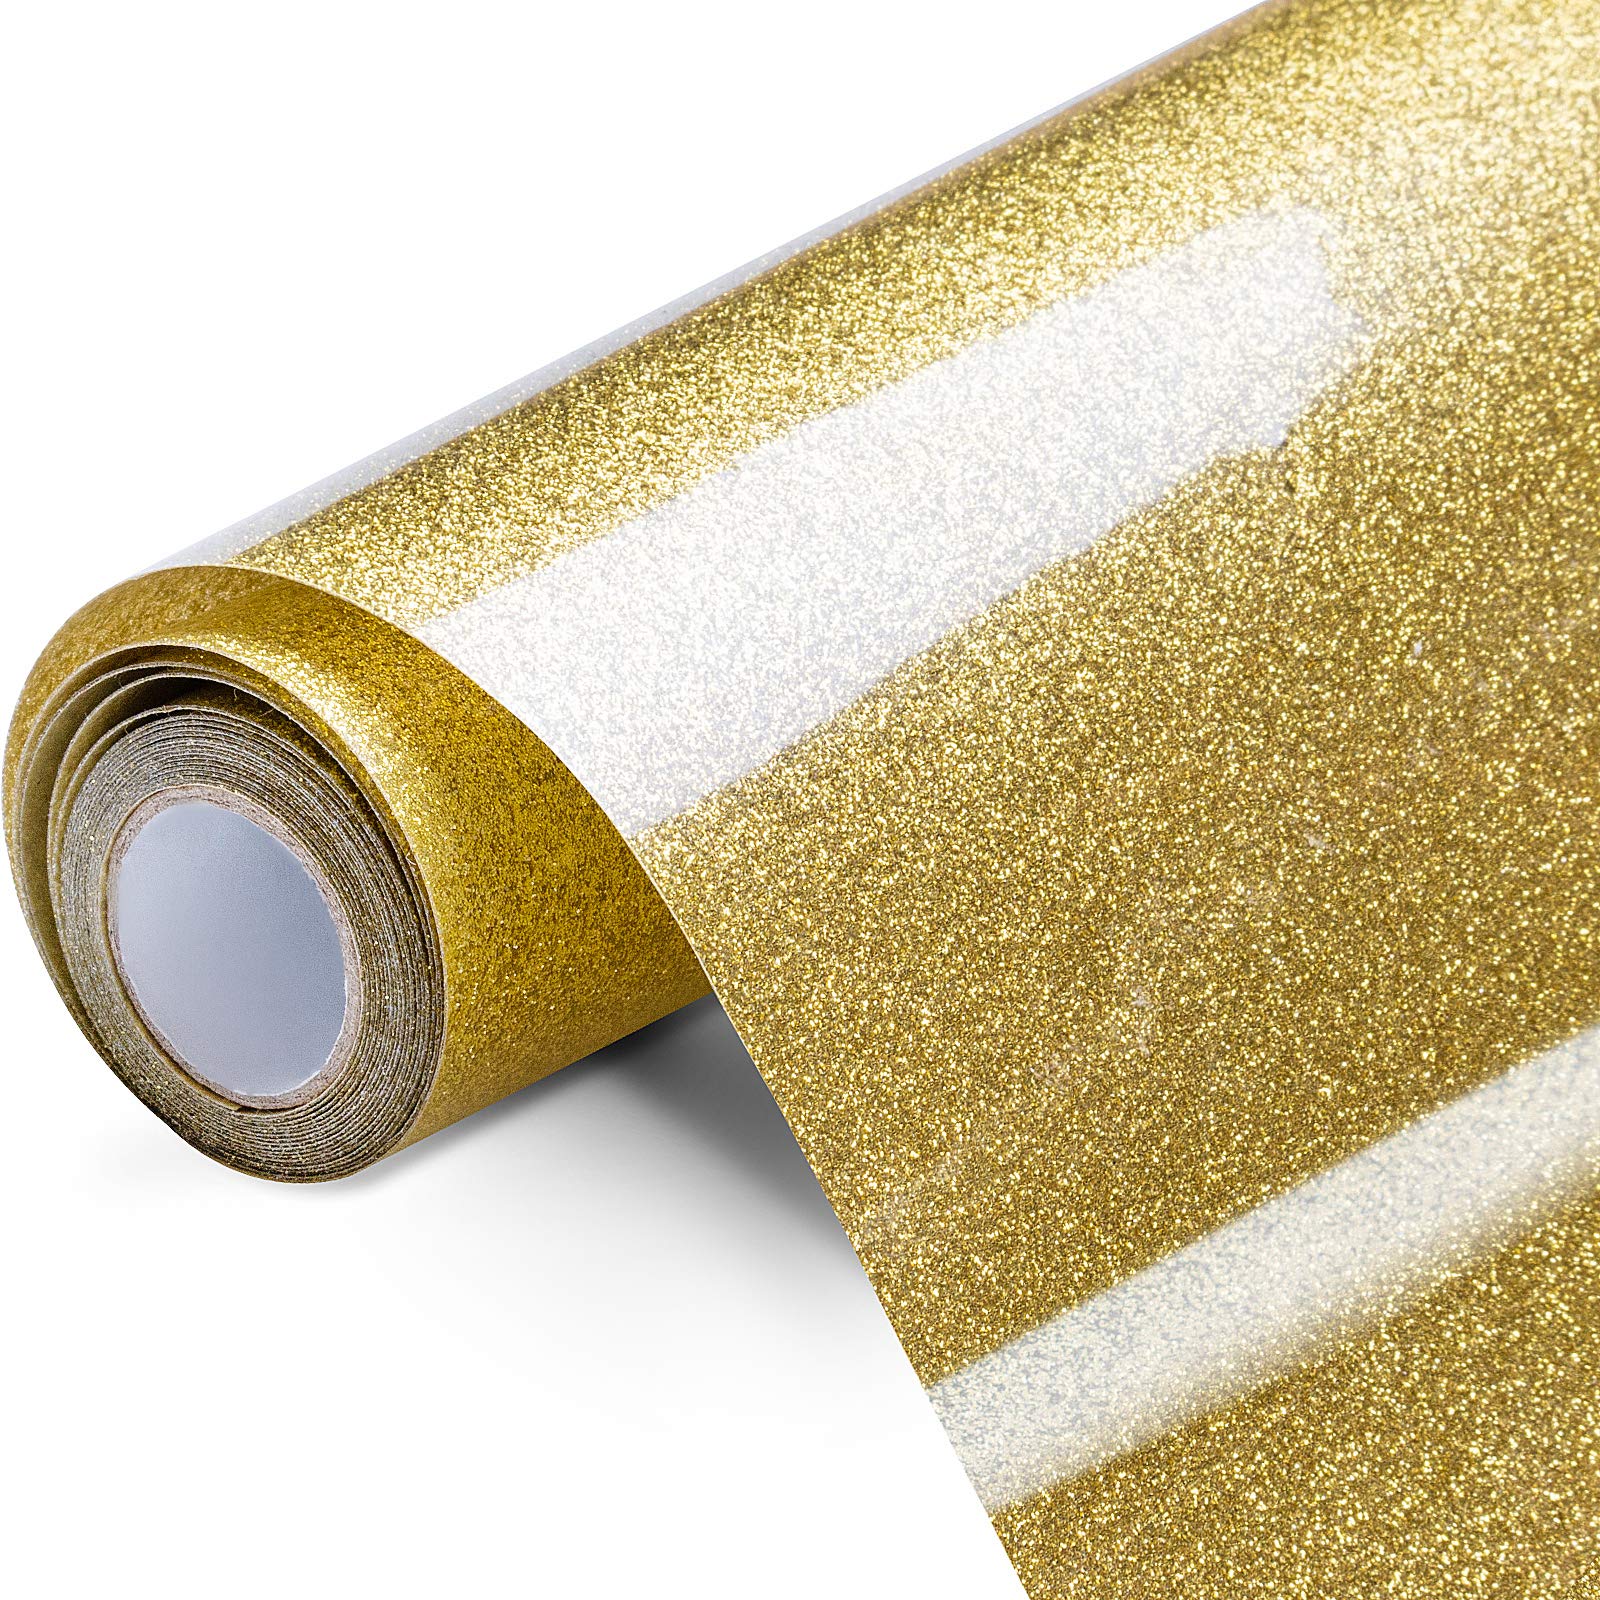 Gold Glitter HTV Heat Transfer Vinyl Roll - 12in x 10ft Iron on Vinyl for  Cricut & Silhouette Easy to Cut & Weed for Shirts Gifts